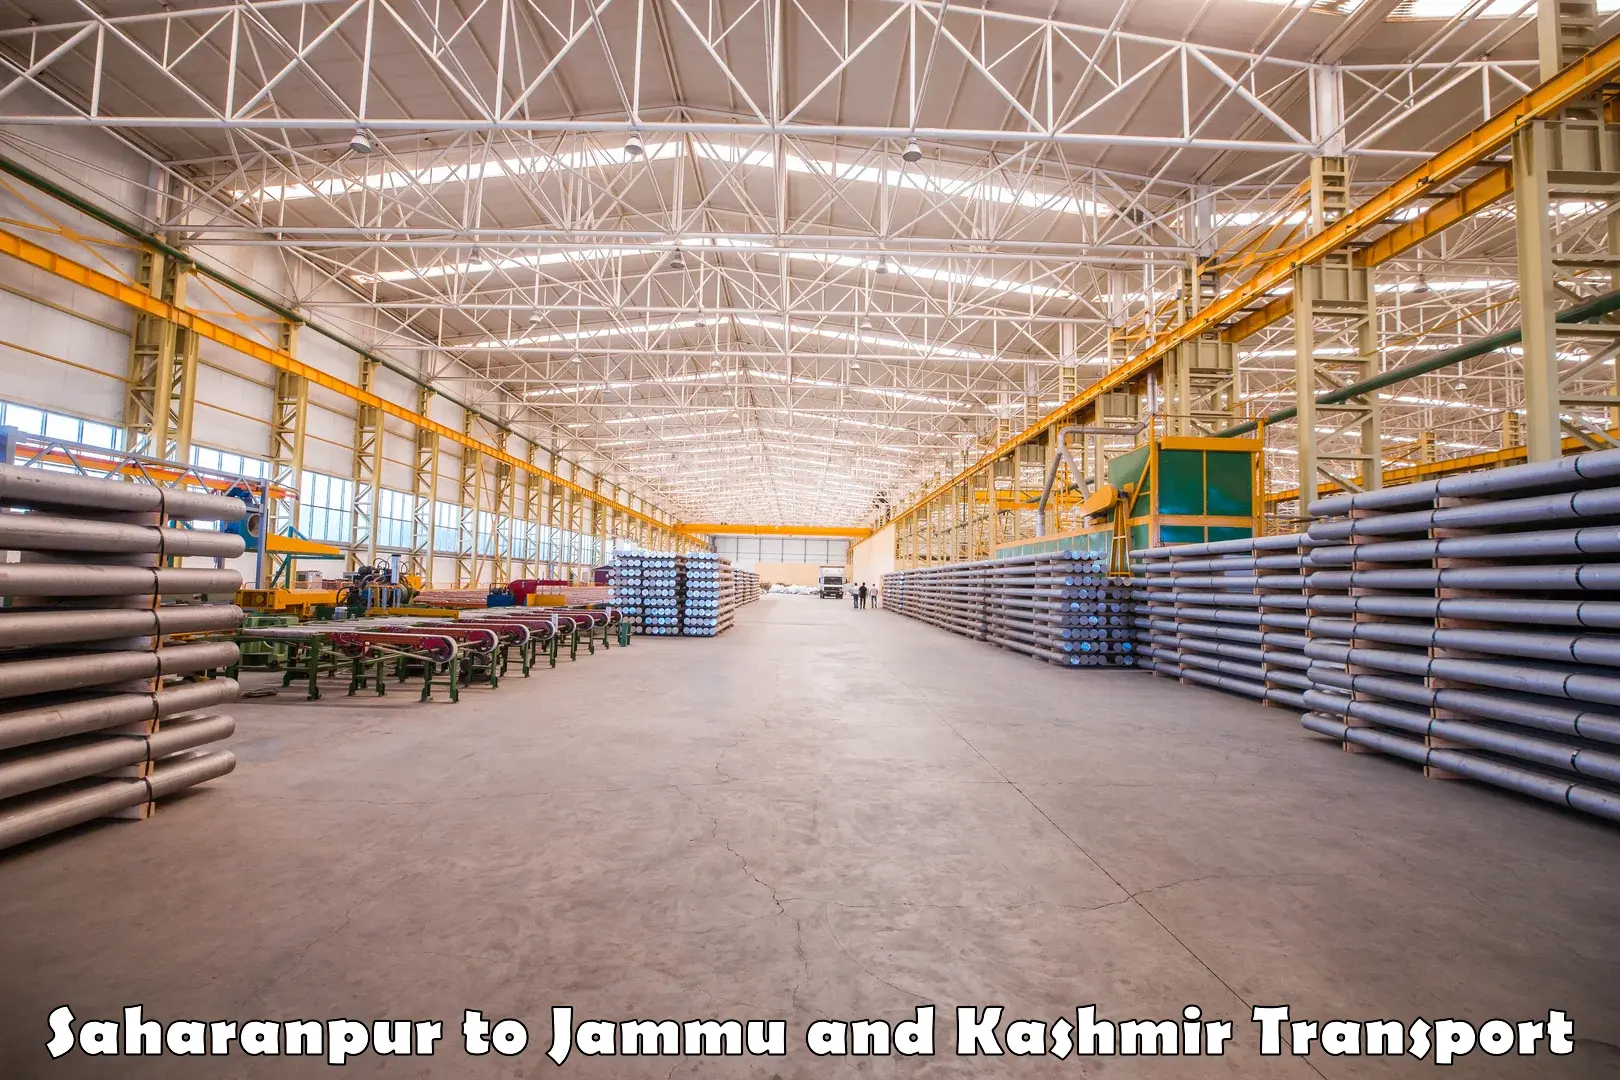 Air freight transport services in Saharanpur to Anantnag